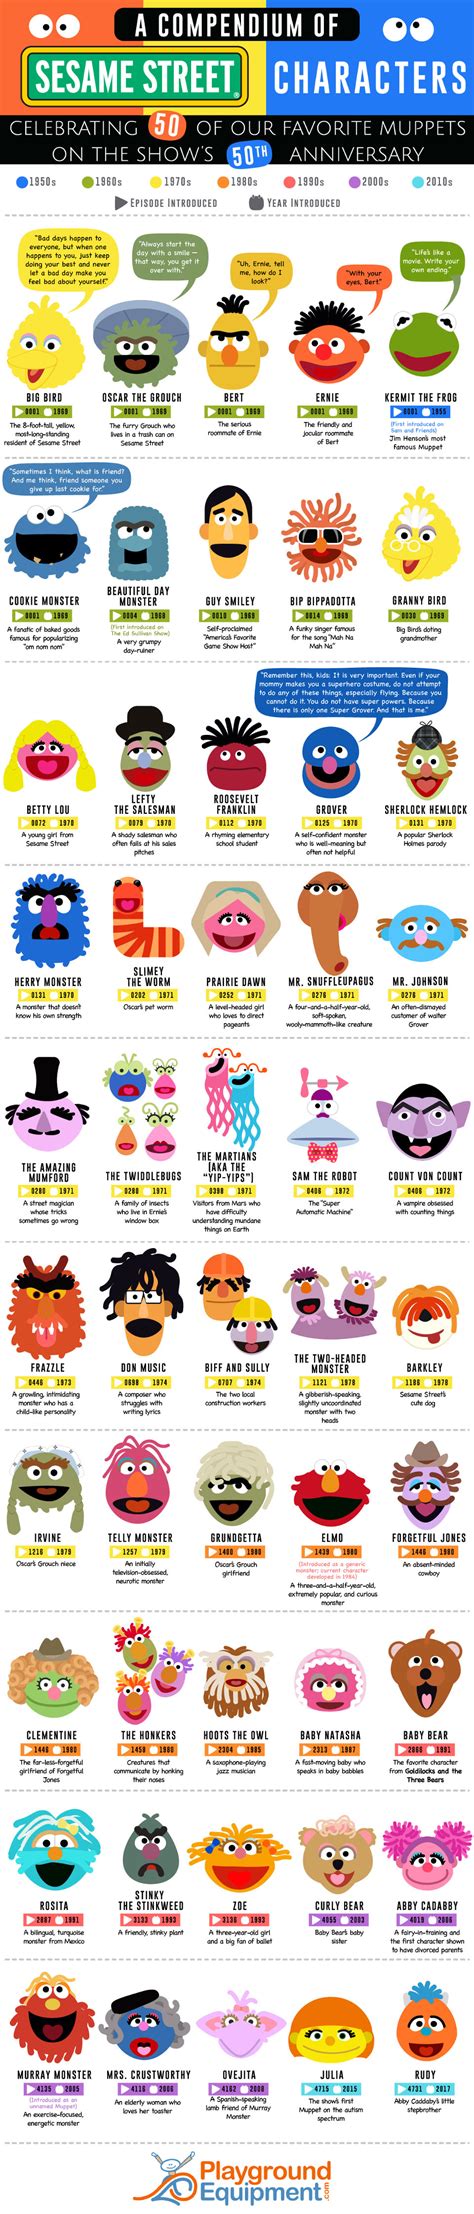 50 Years Of Sesame Street Characters Infographic